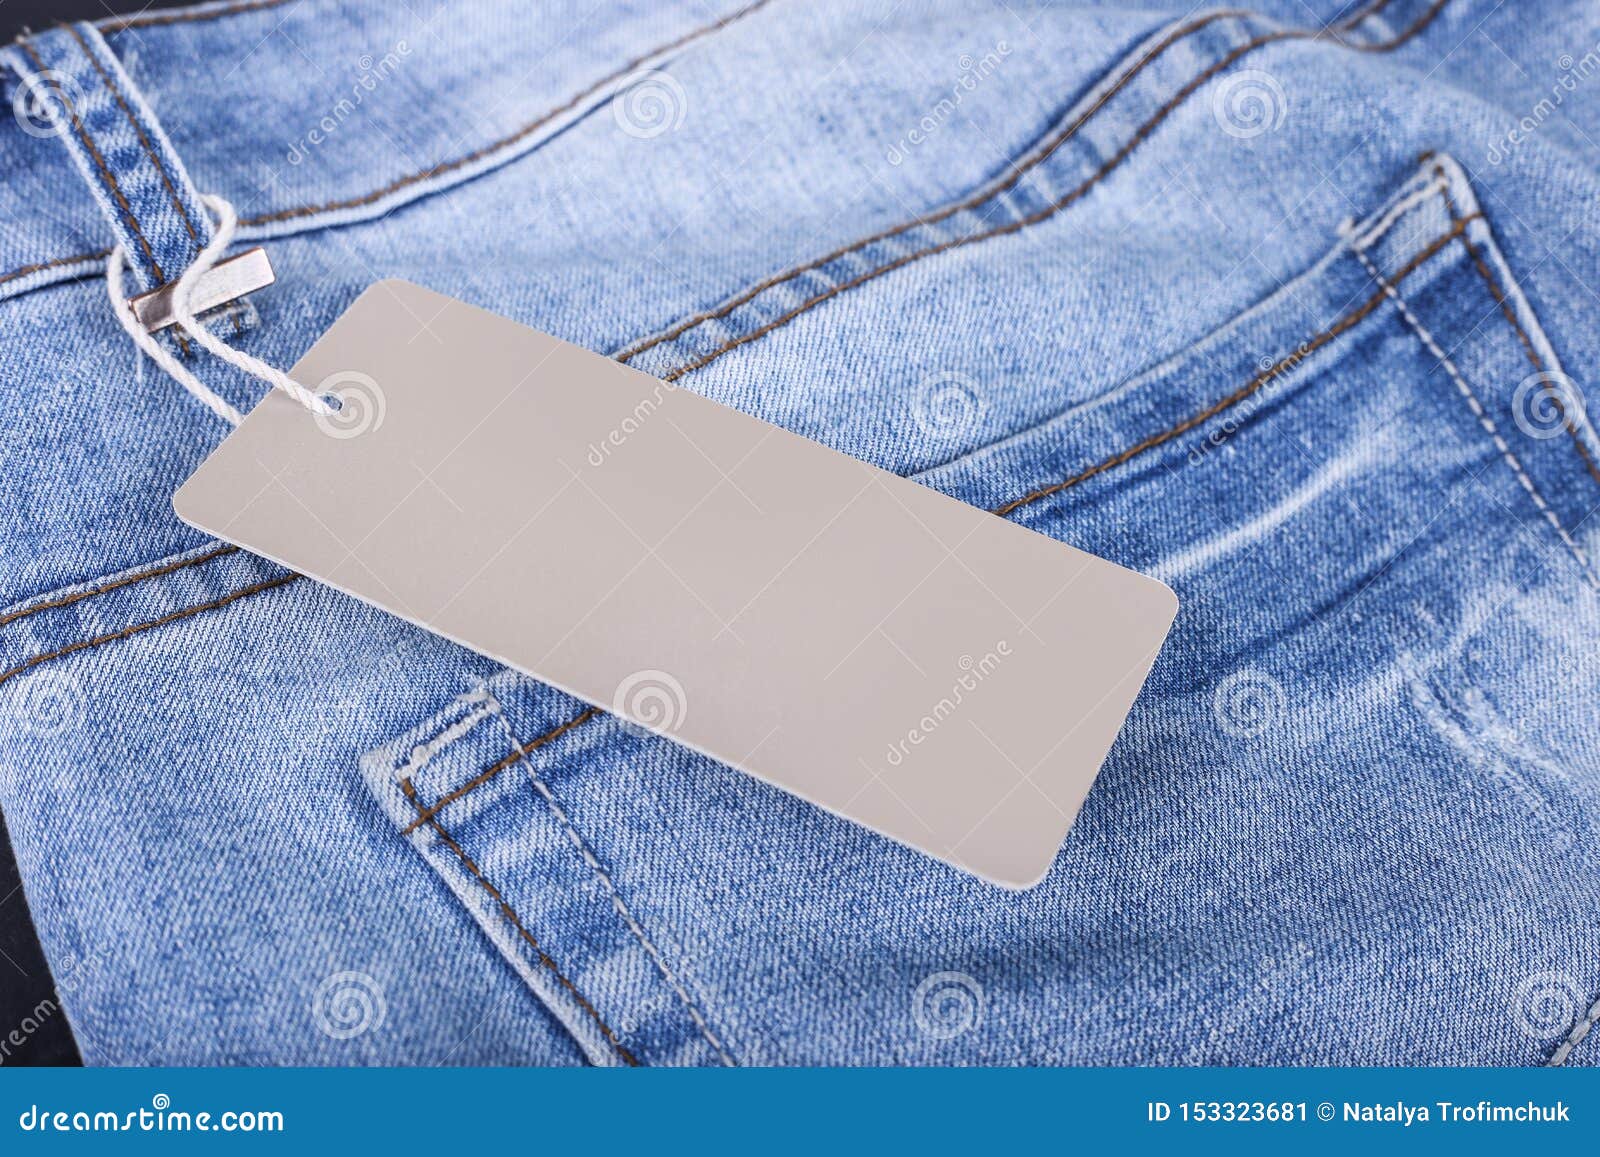 Price Tag Advertising Clothing Jeans Texture. Price Tag Mockup Stock ...